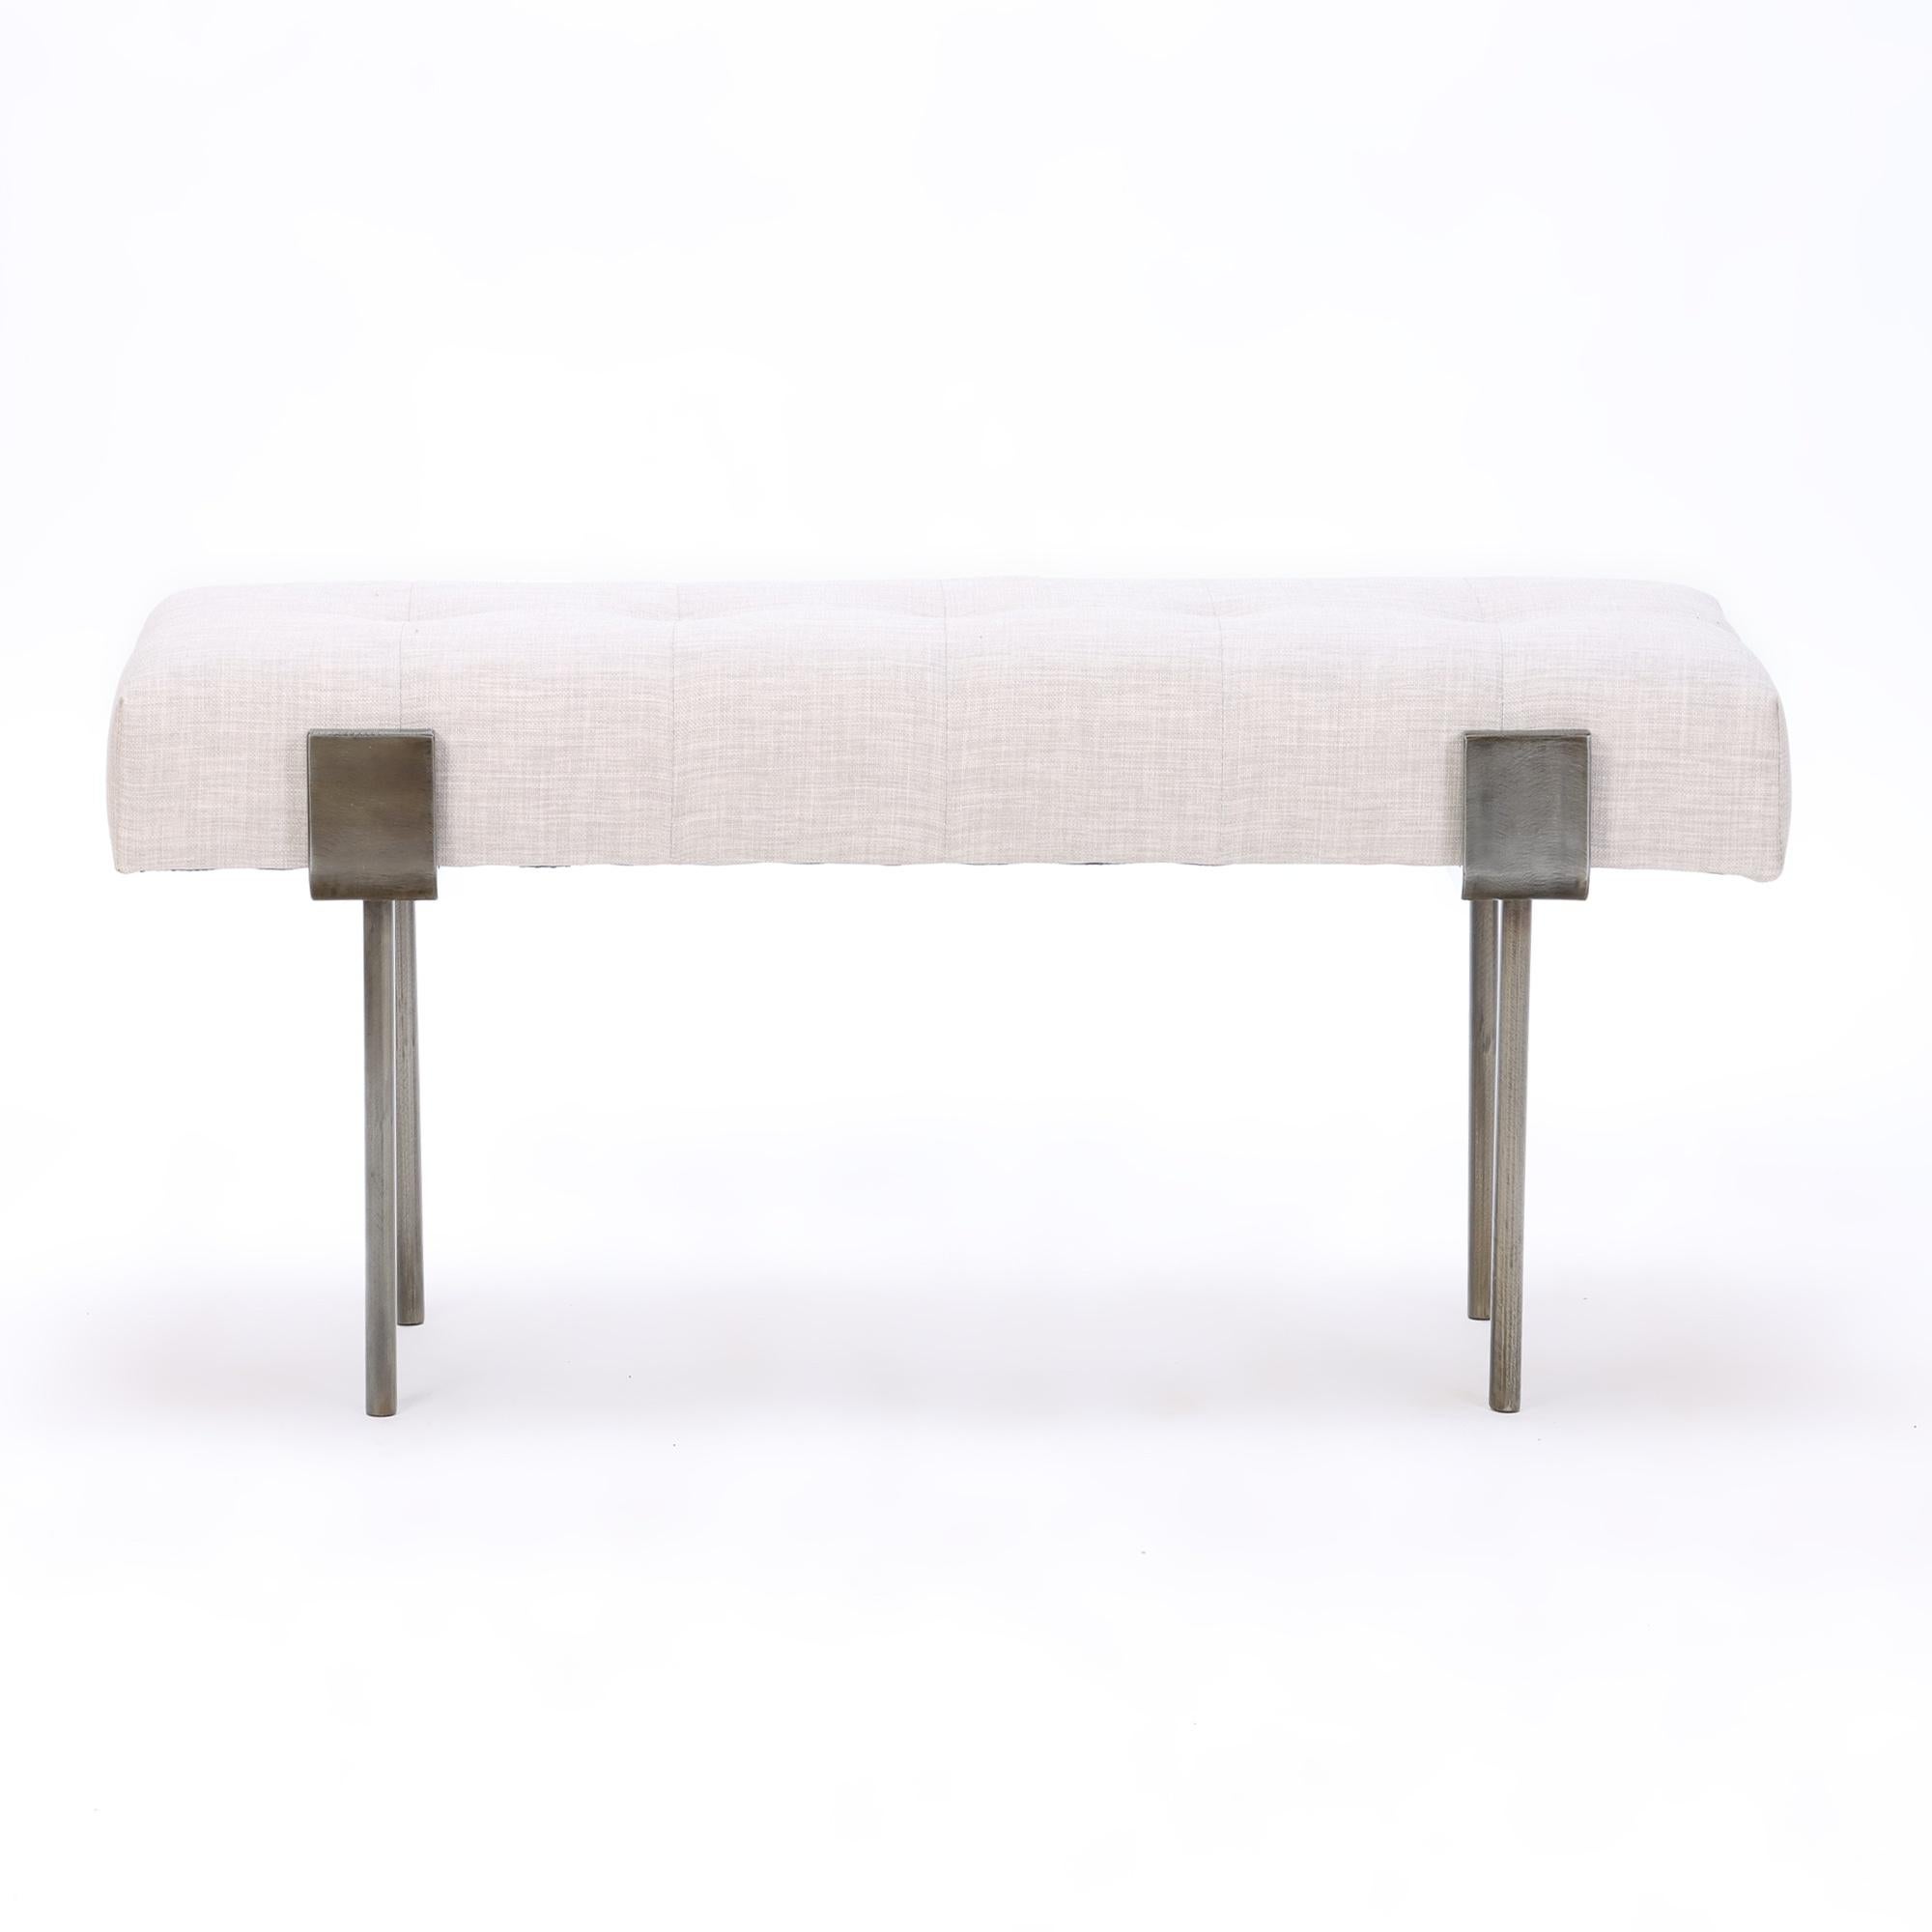 A contemporary iron bench with linen upholstery. Bronze wash base.